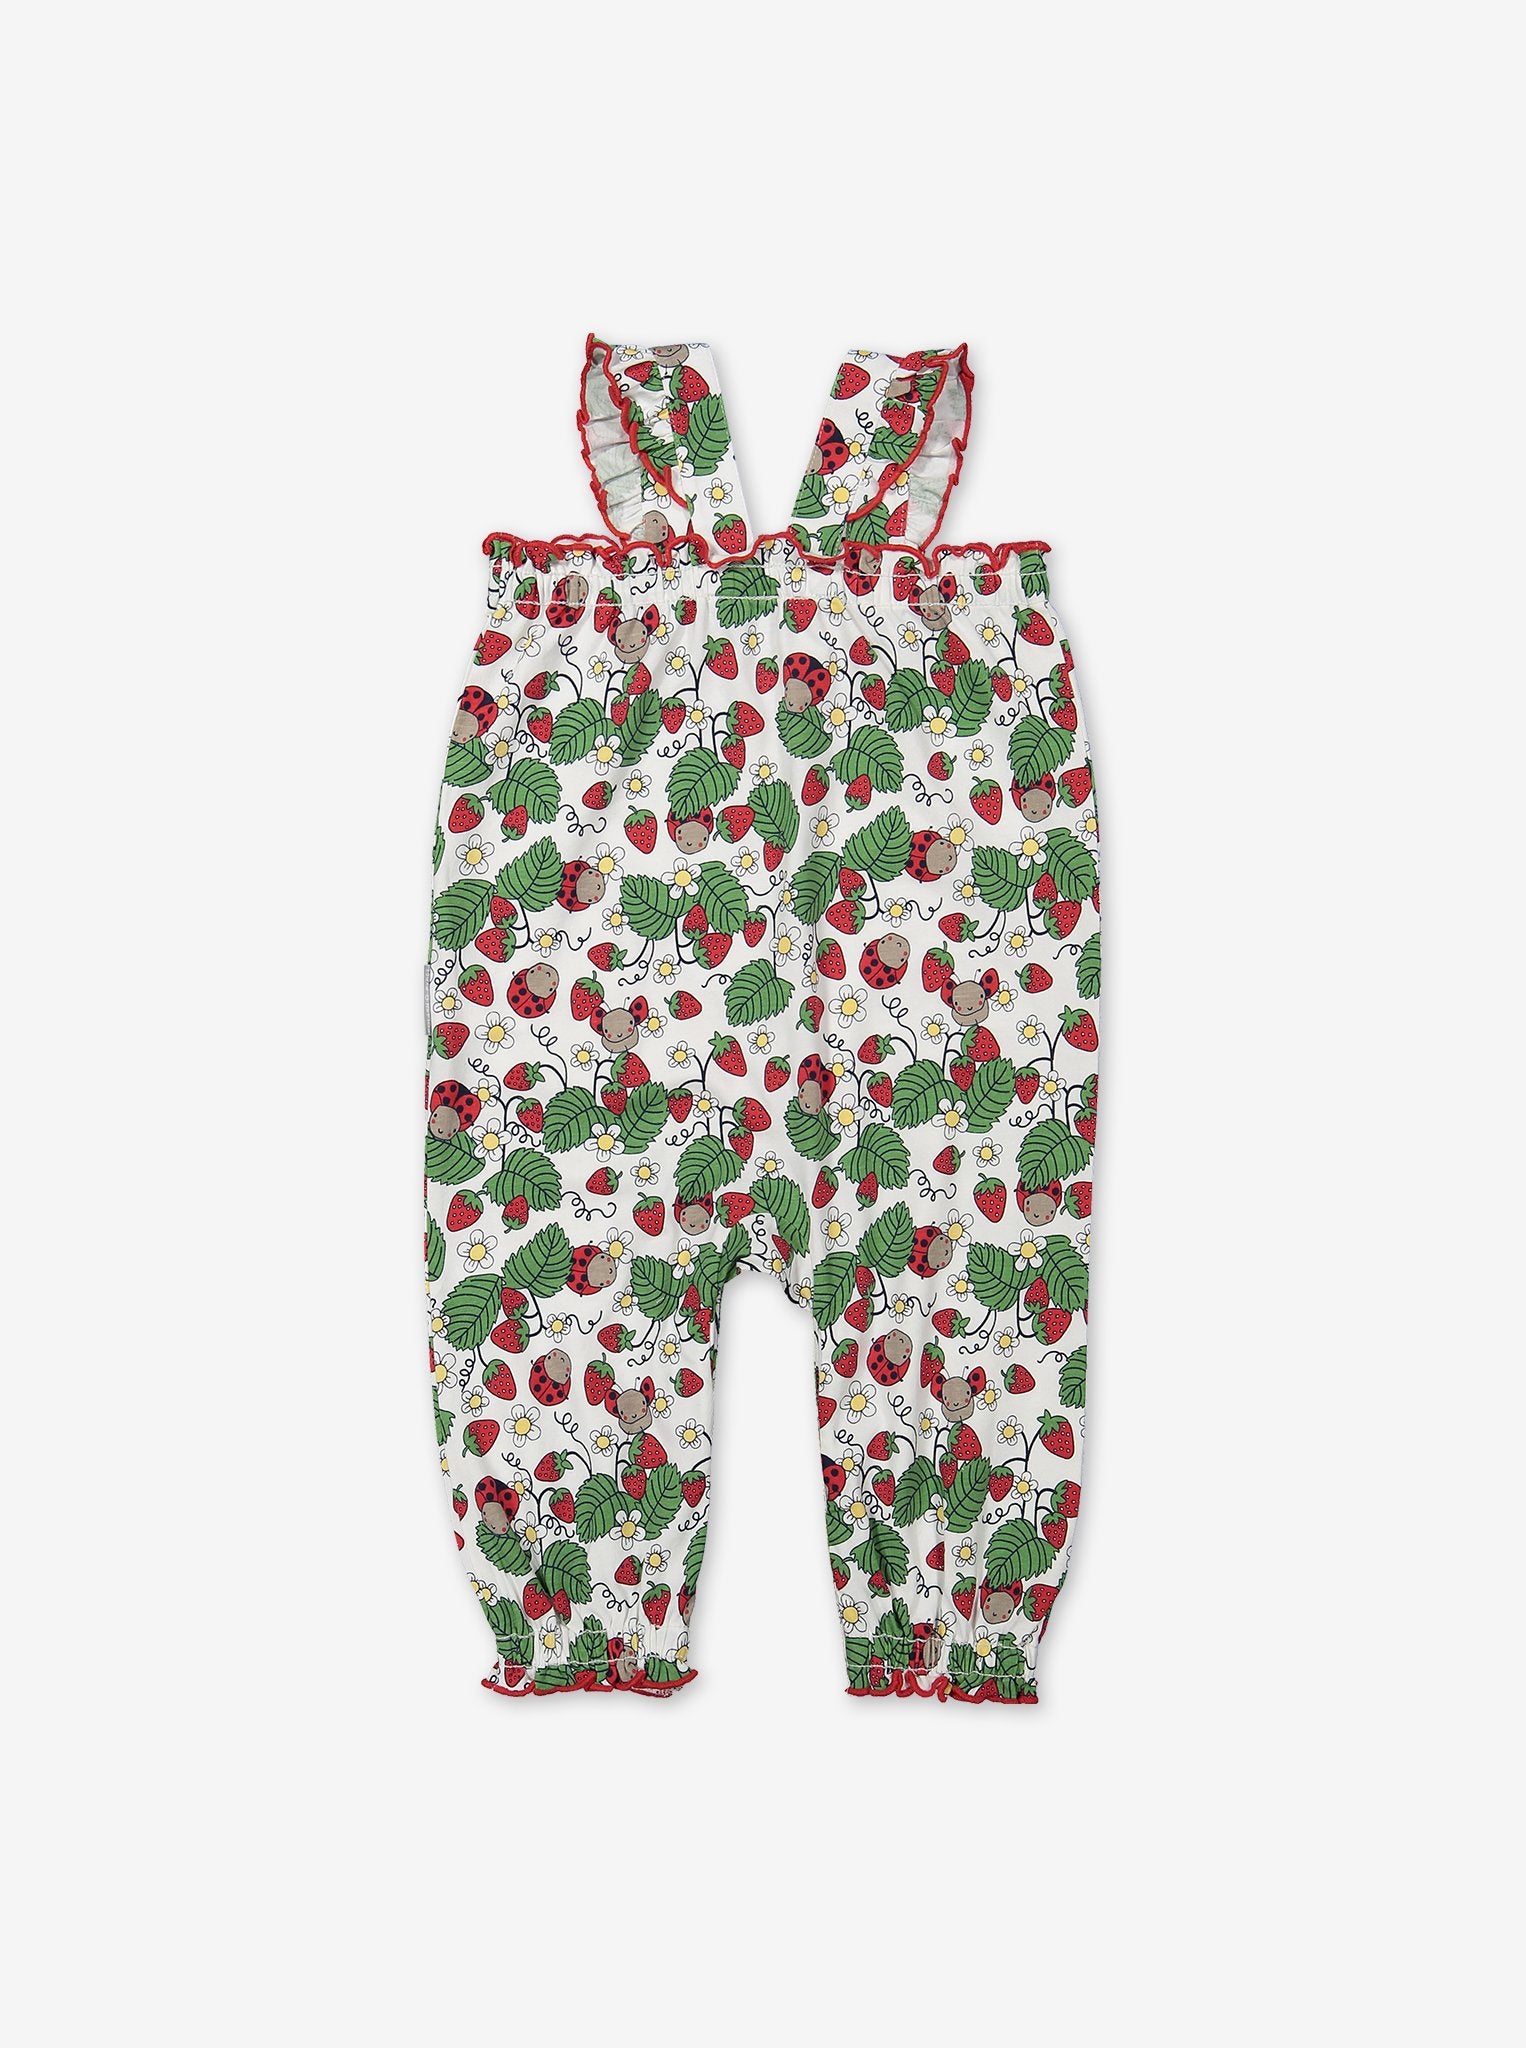 Strawberry Baby Playsuit